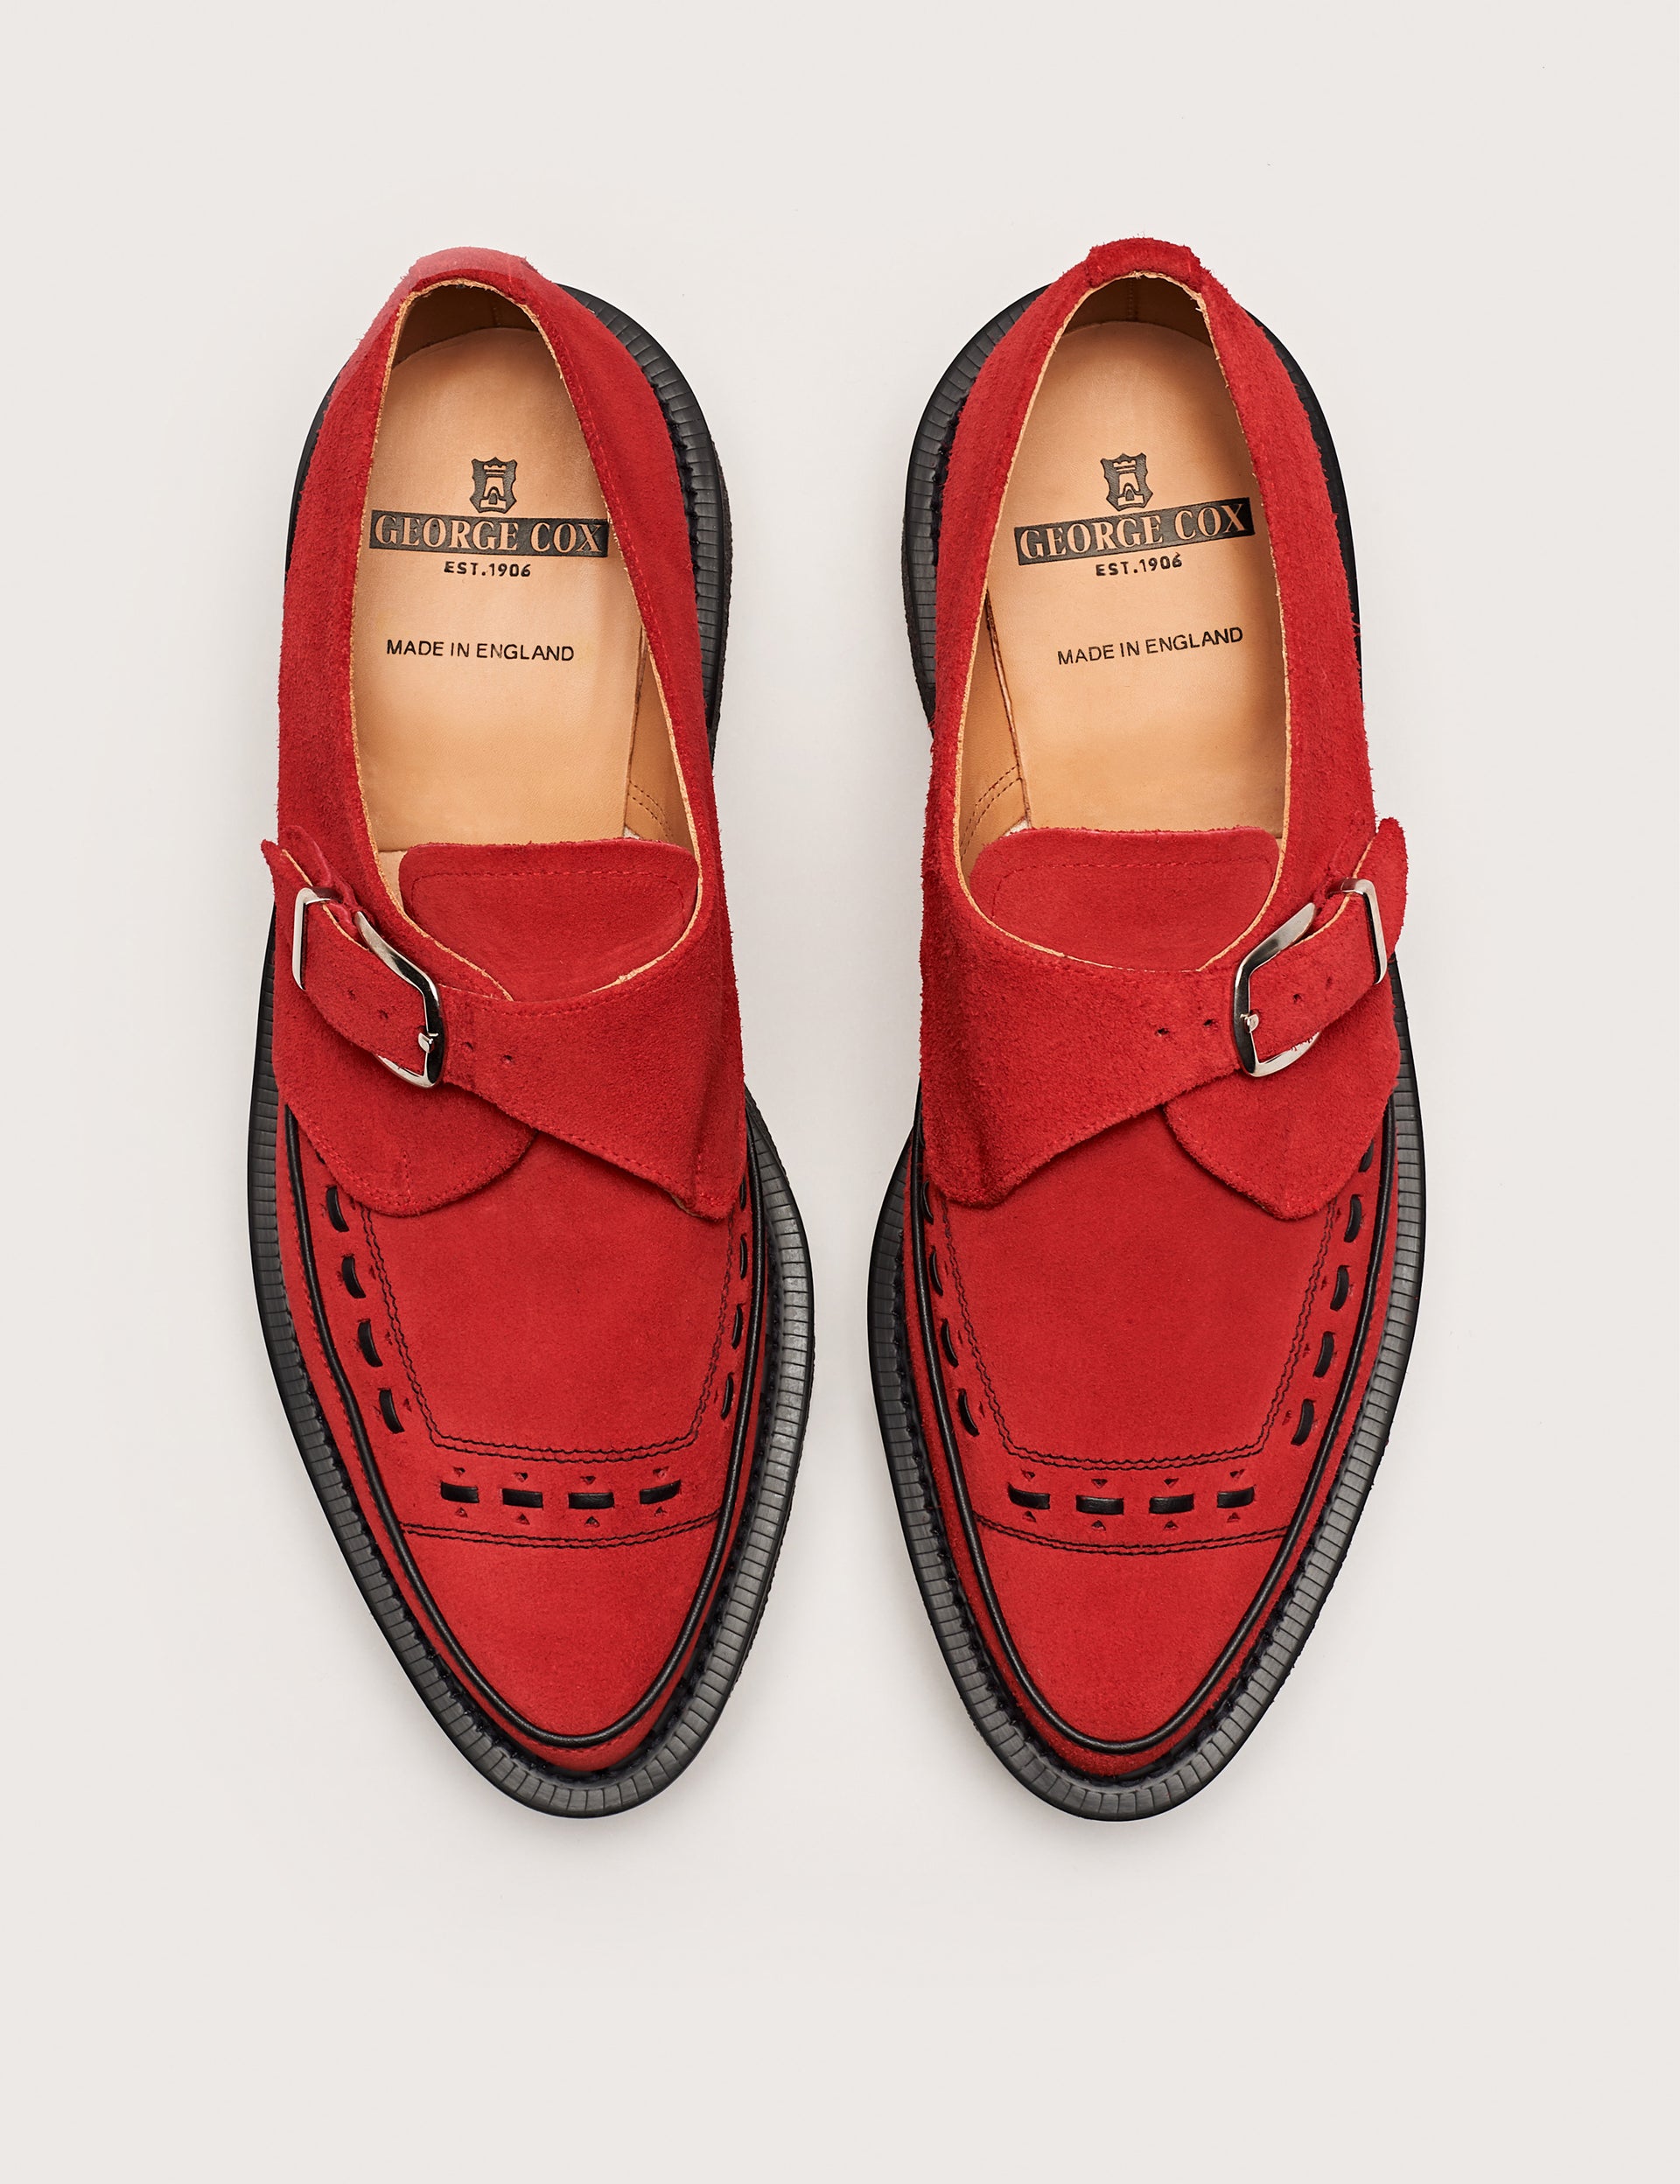 Diano Monk Red Suede